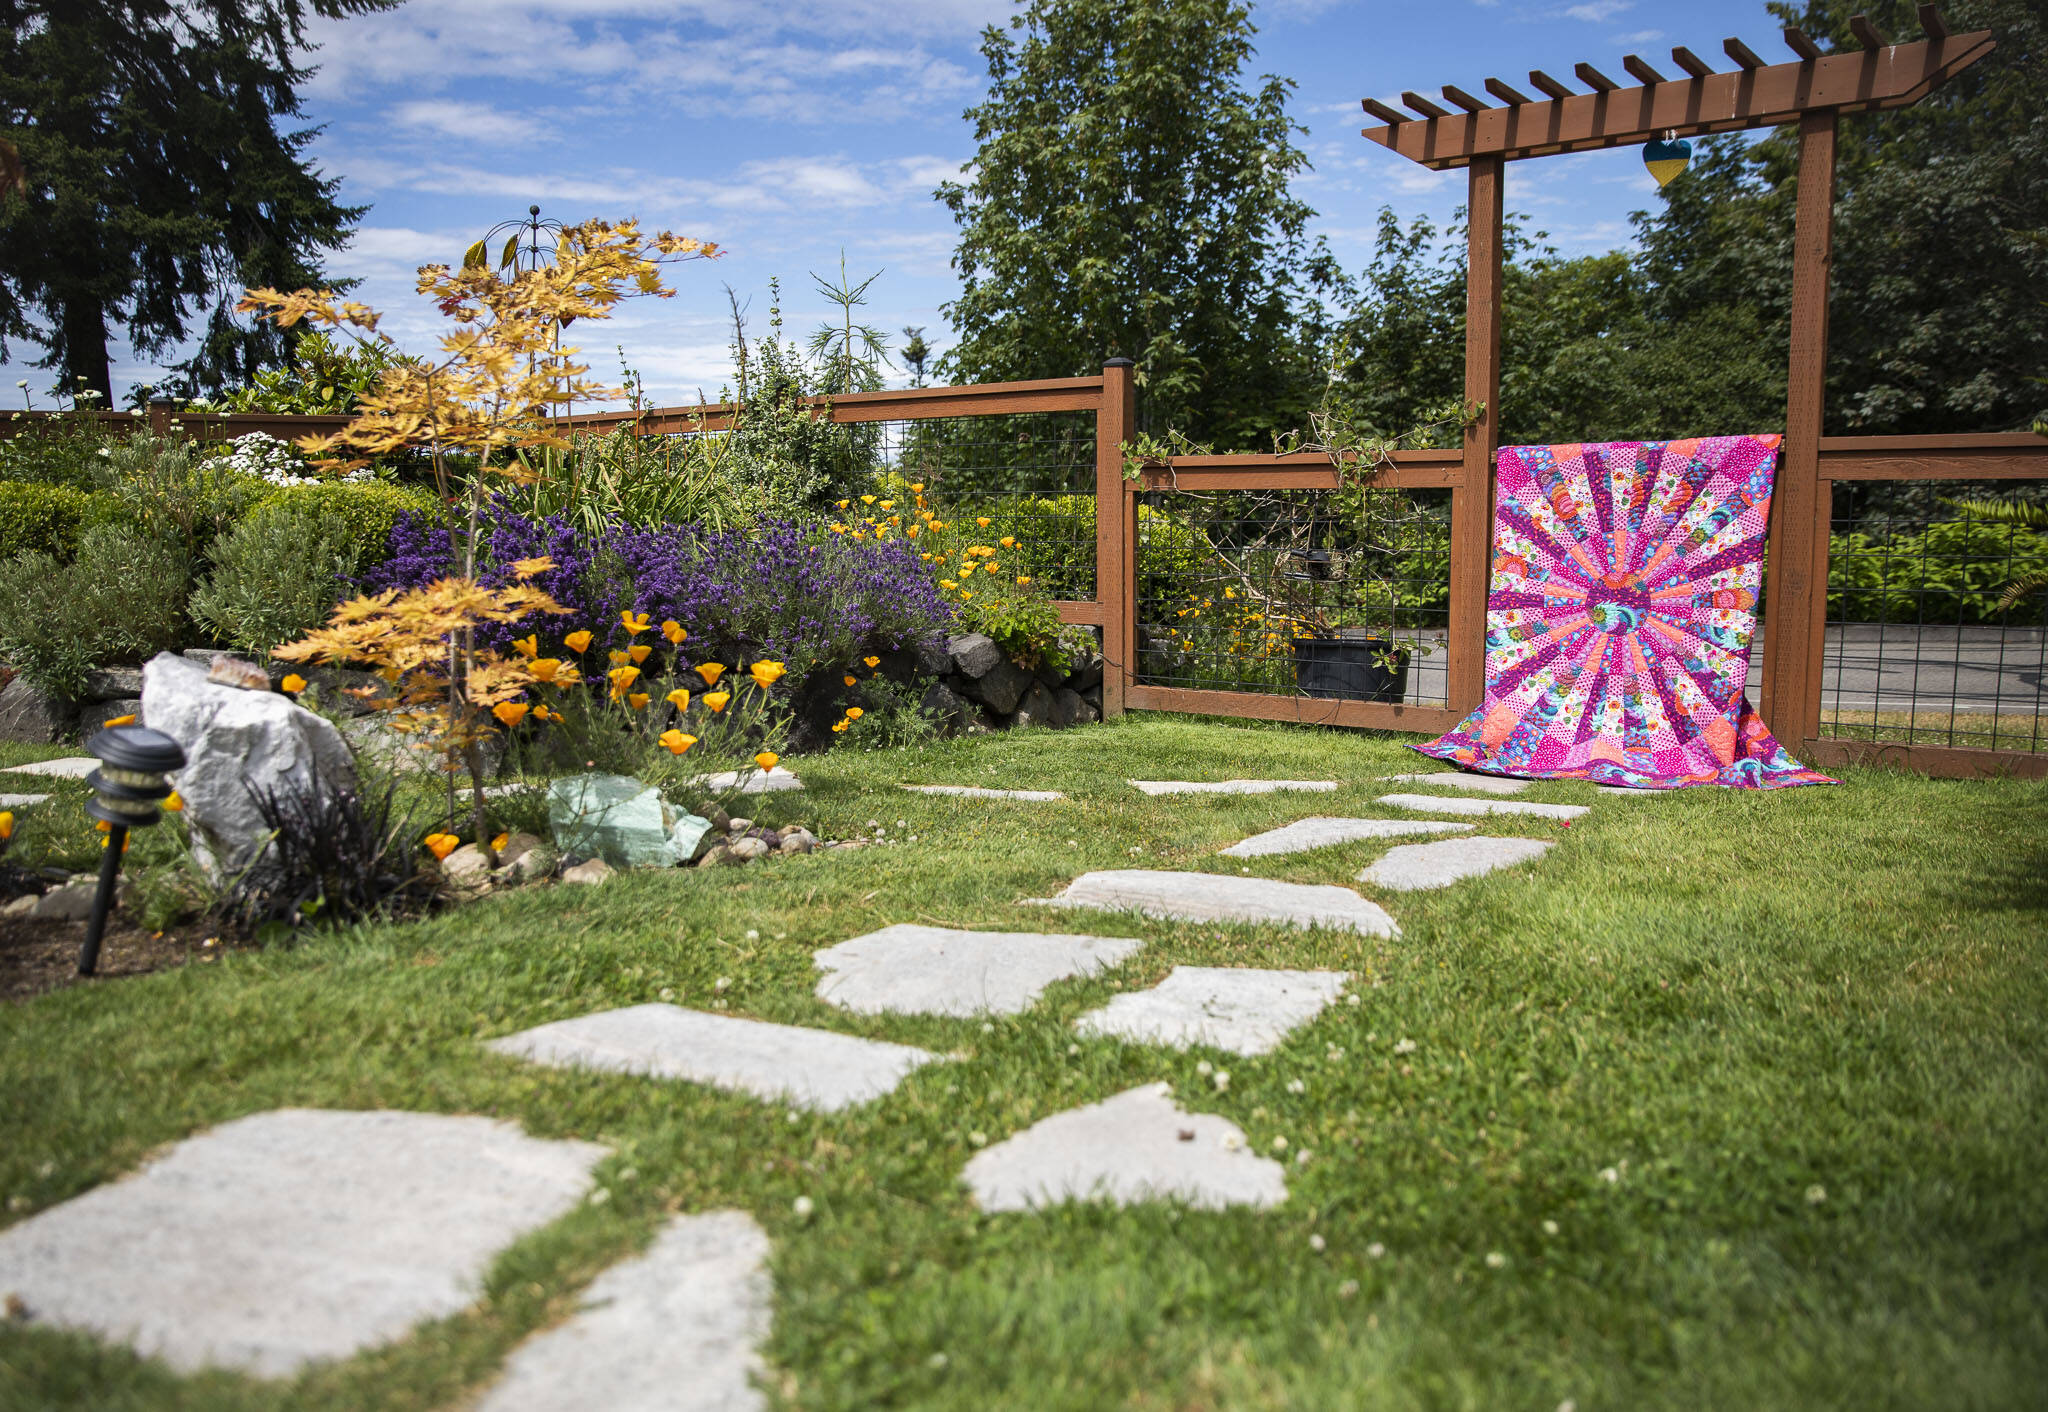 A quilt titled “Wheel of Fortune” hangs on the fence at the Mukilteo Garden Quilt Tour home of gardeners MaryJane Cavanagh and Les Nelson. The tour is July 16 and 17. (Olivia Vanni / The Herald)